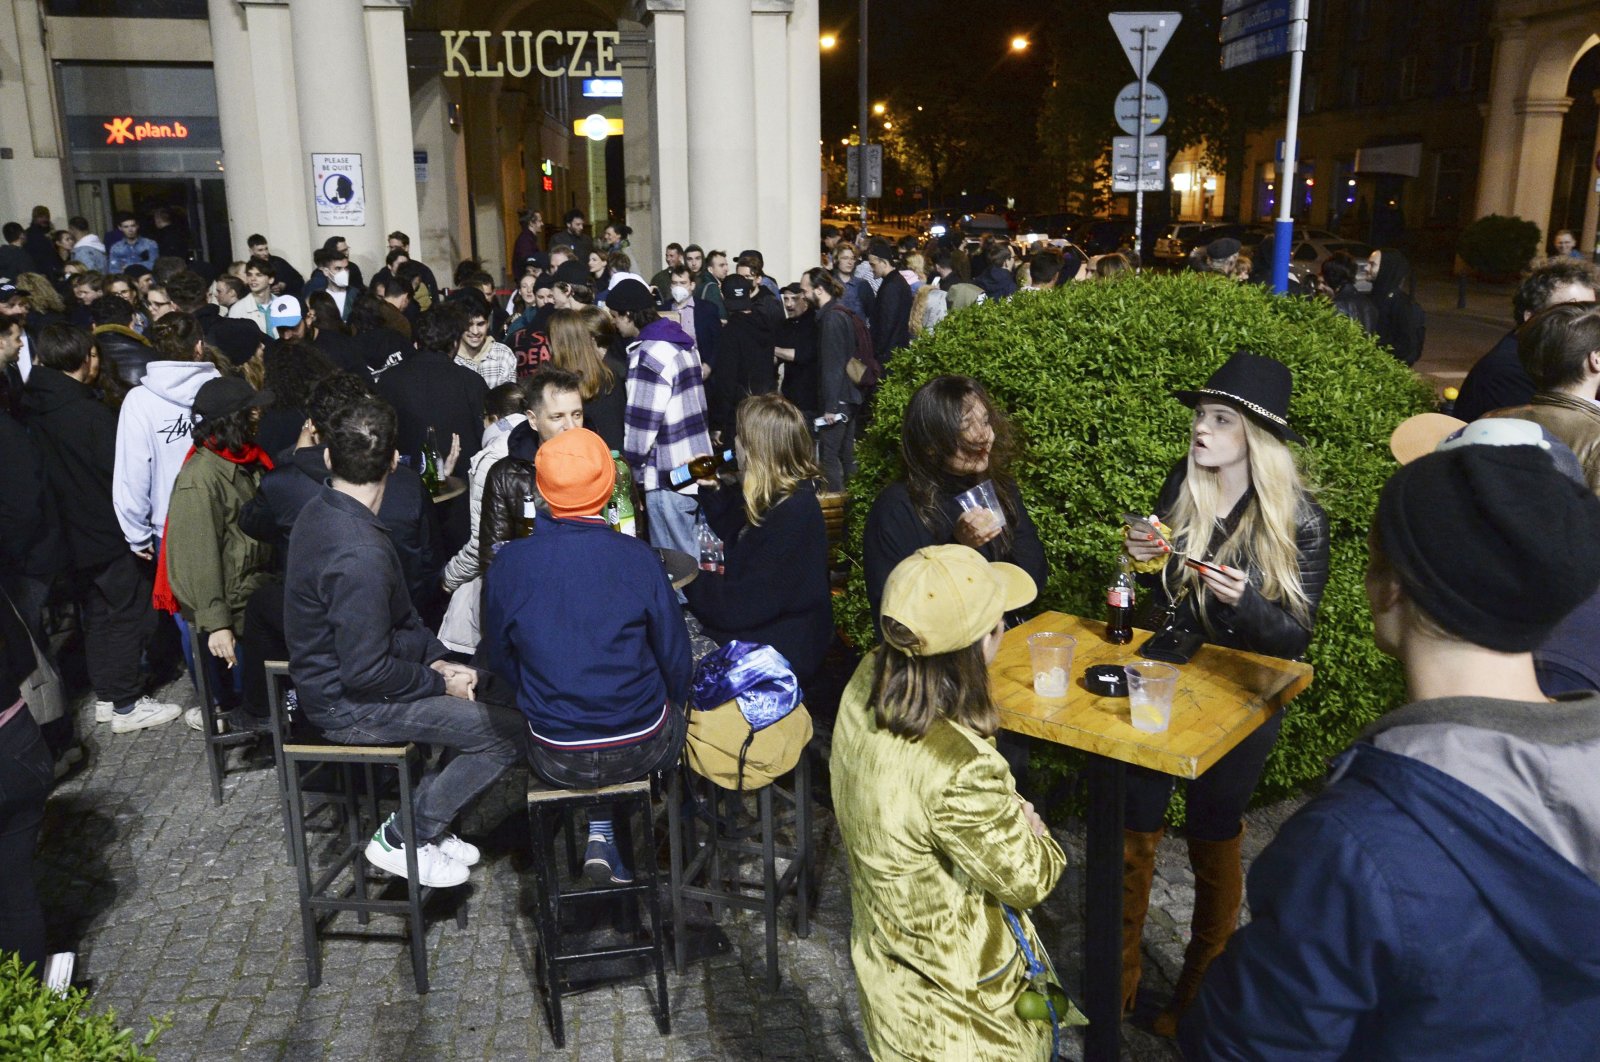 People gather and celebrate as bars, clubs and other establishments reopened in Poland after being closed for seven months, in Warsaw, Poland, May 14, 2021. (AP Photo)